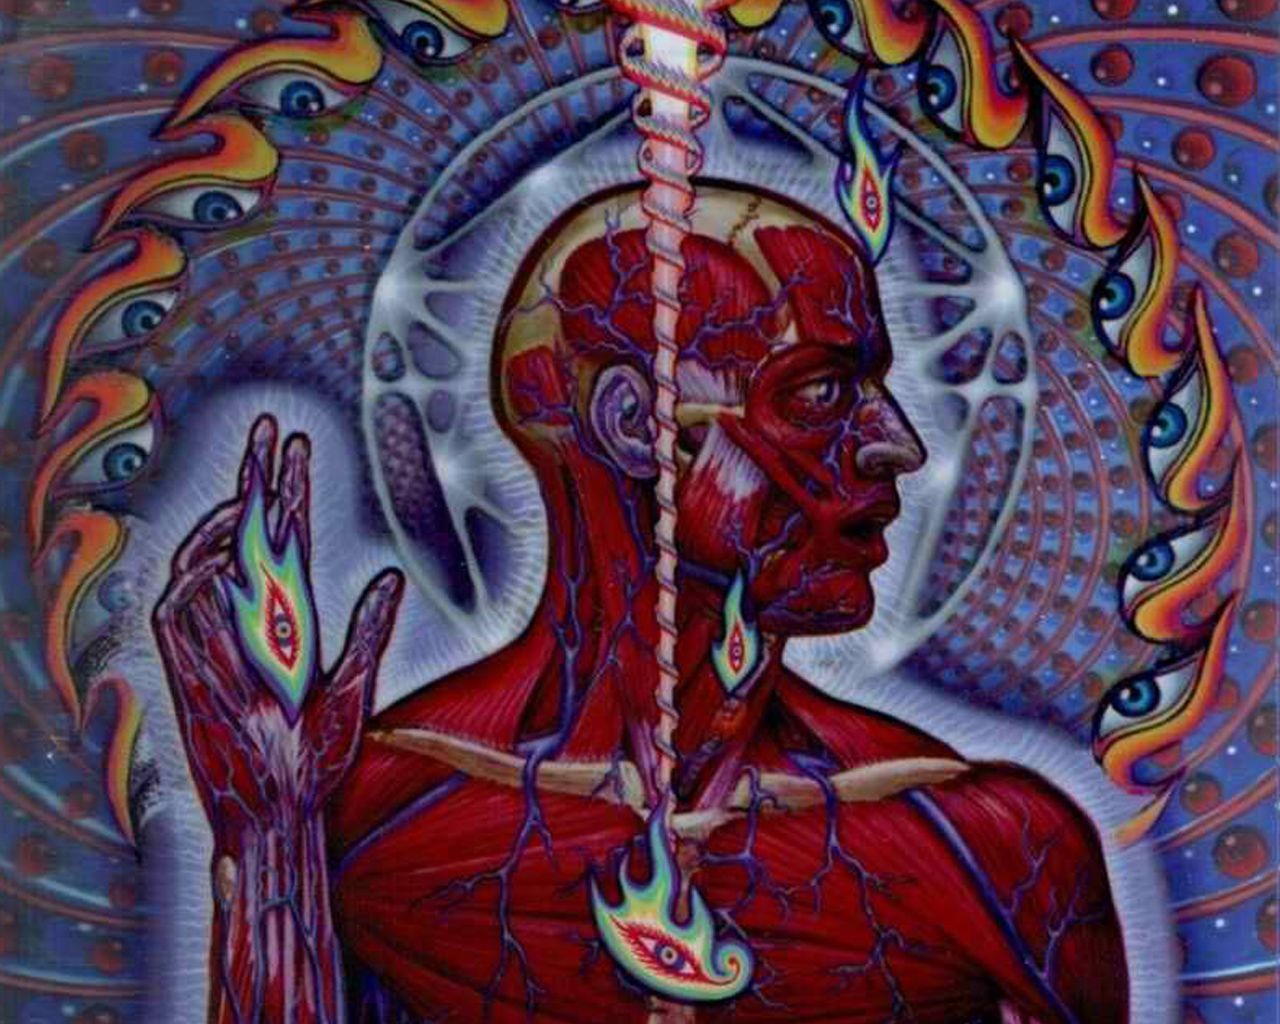 image For > Tool Lateralus Album Art. Tool band artwork, Tool band art, Album art